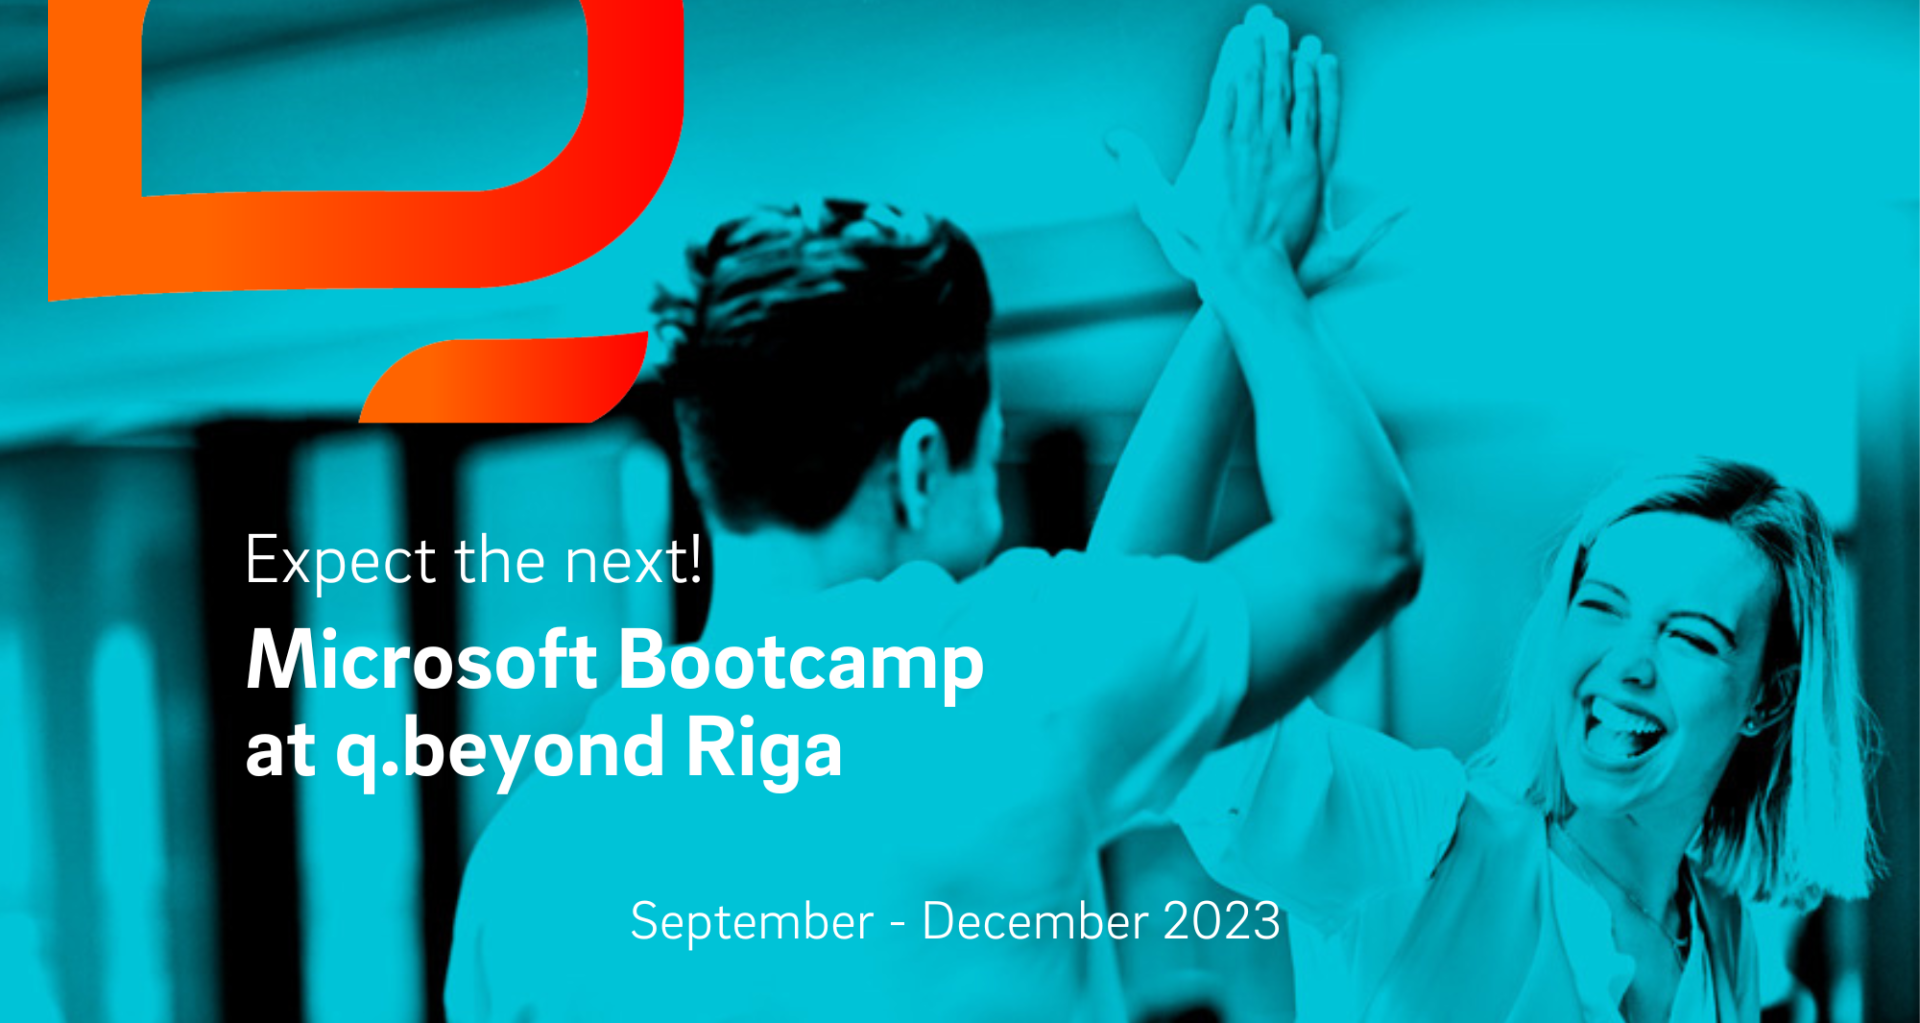 Level up your career with Microsoft Bootcamp in Riga!